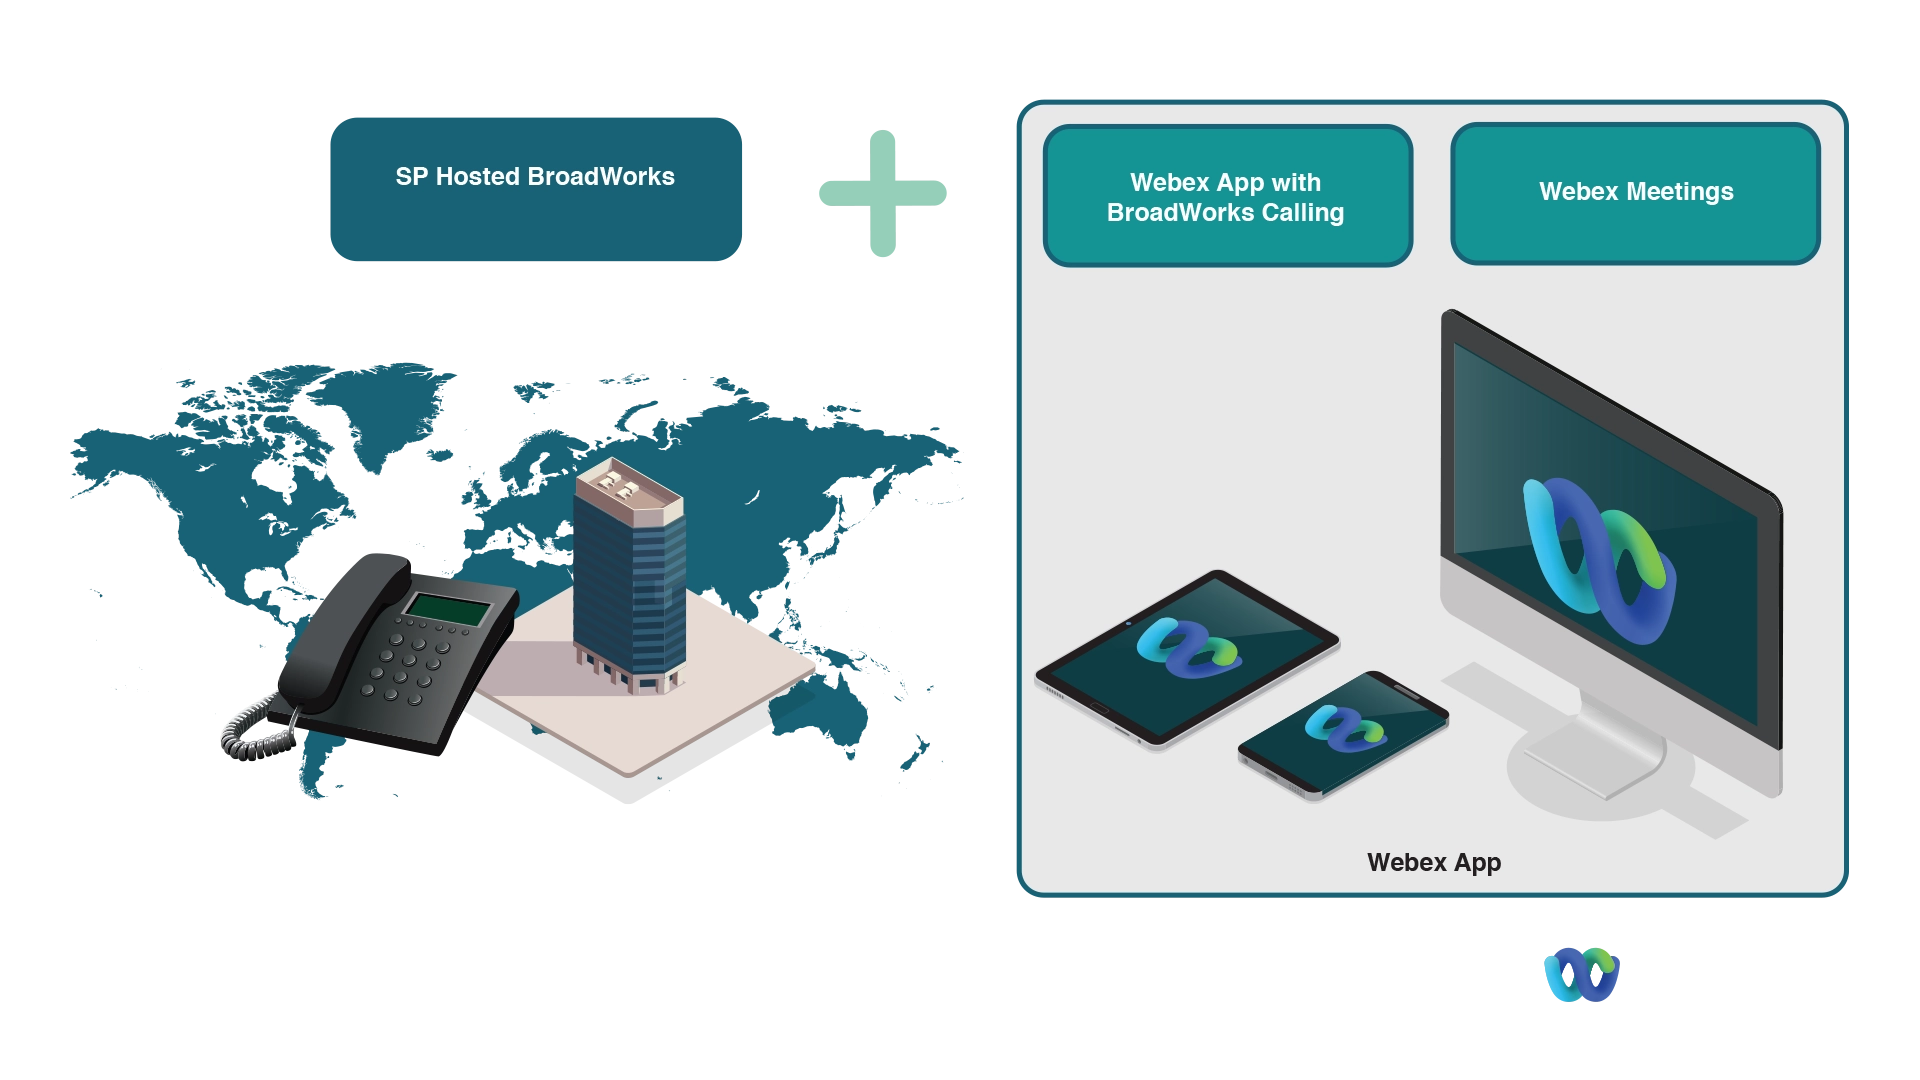 Cisco Webex - Our Unified Communications-as-a-Service solution is at the heart of the Exponential-e homogenous core network. 